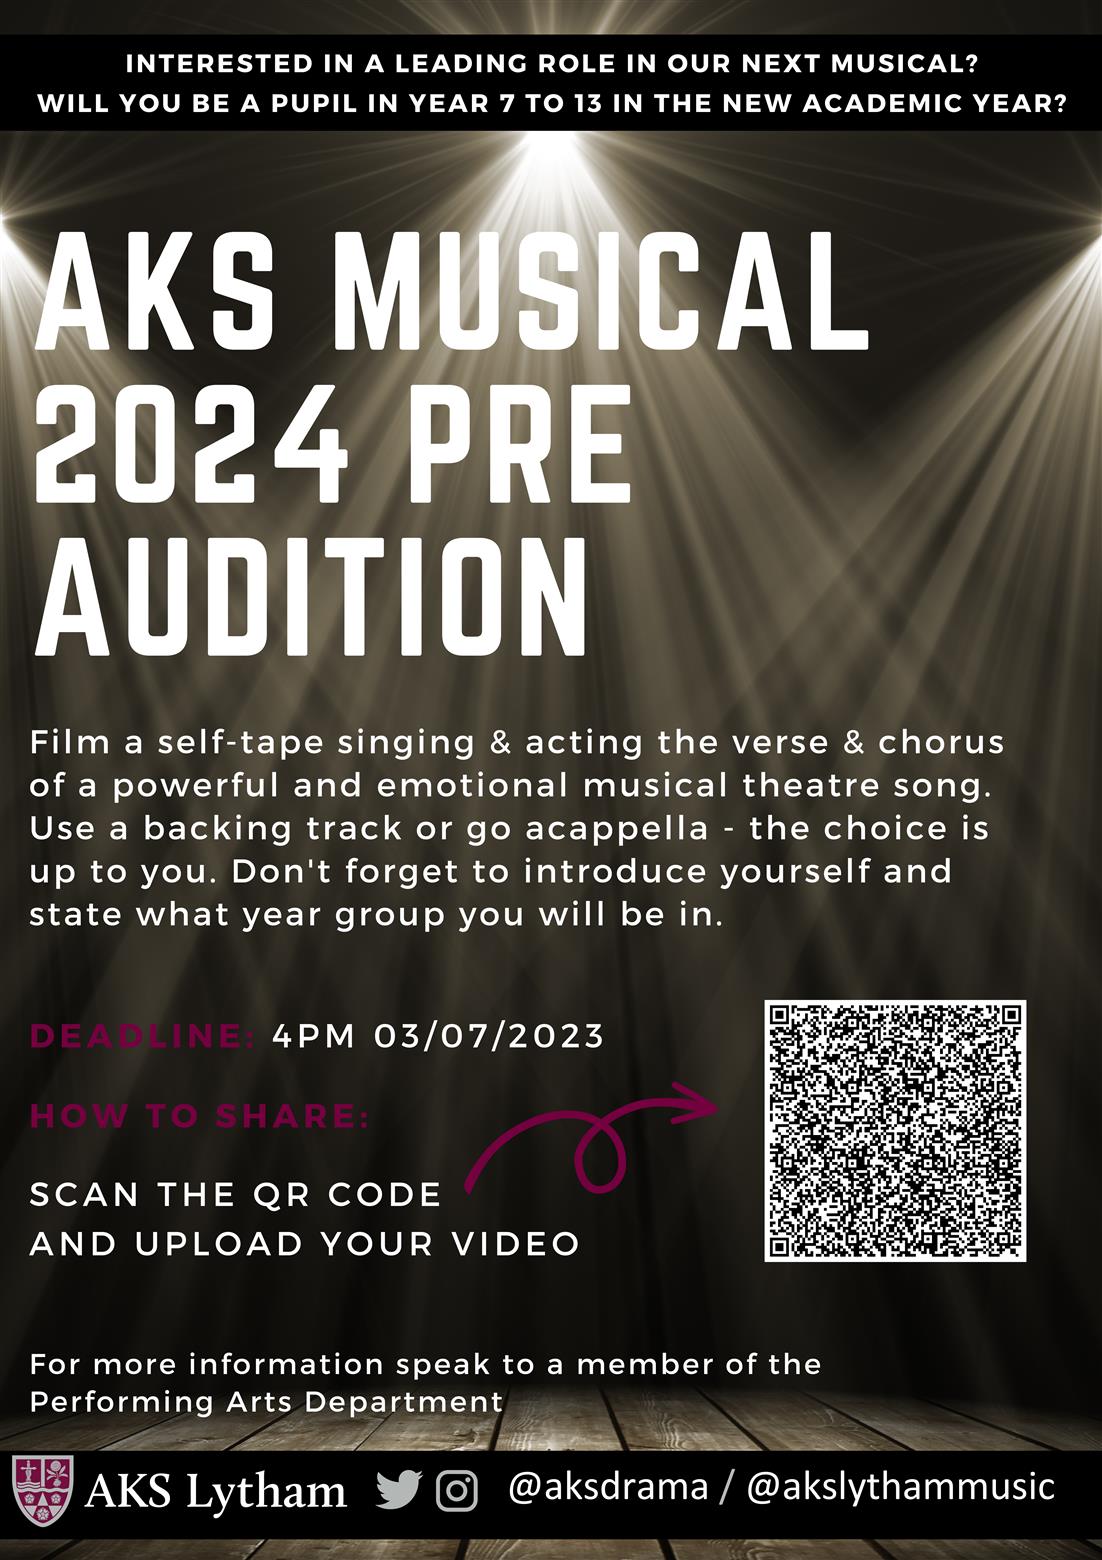 Interested in a leading role in our next school musical?